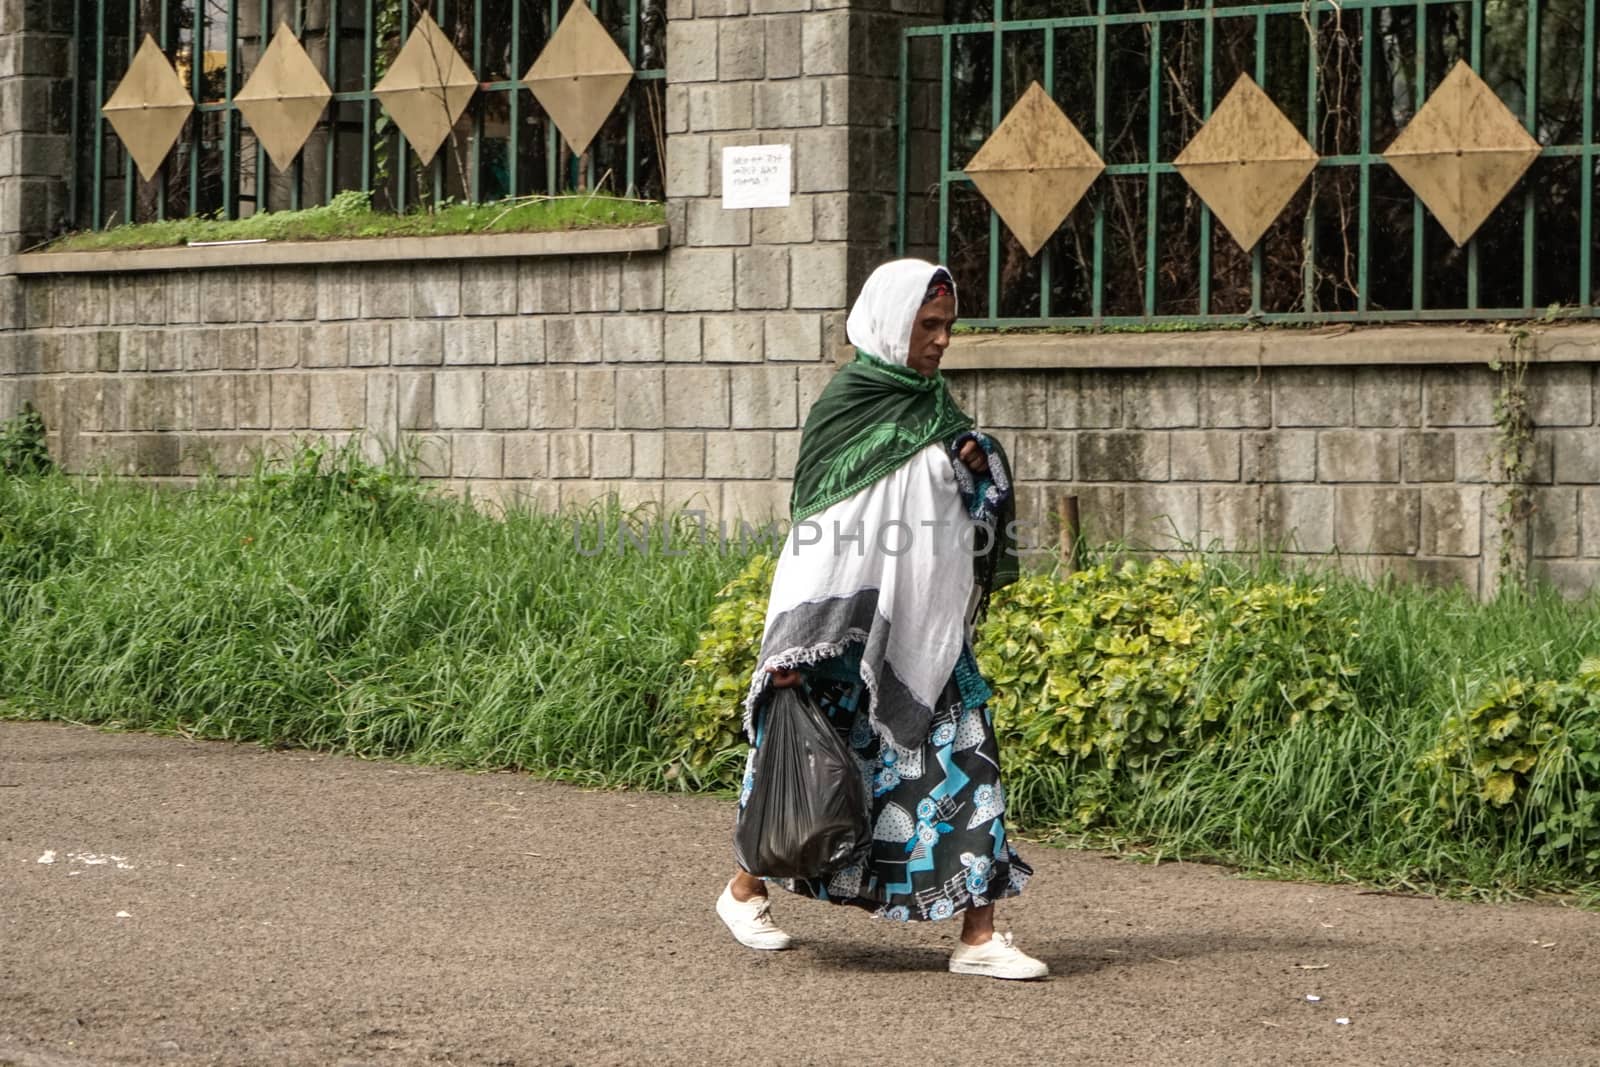 Addis Ababa - July 26: An older woman wearing a mix of modern and traditional clothing returns from the market carrying her groceries in a plastic bag on June 26, 2015 in Addis Ababa, Ethiopia.